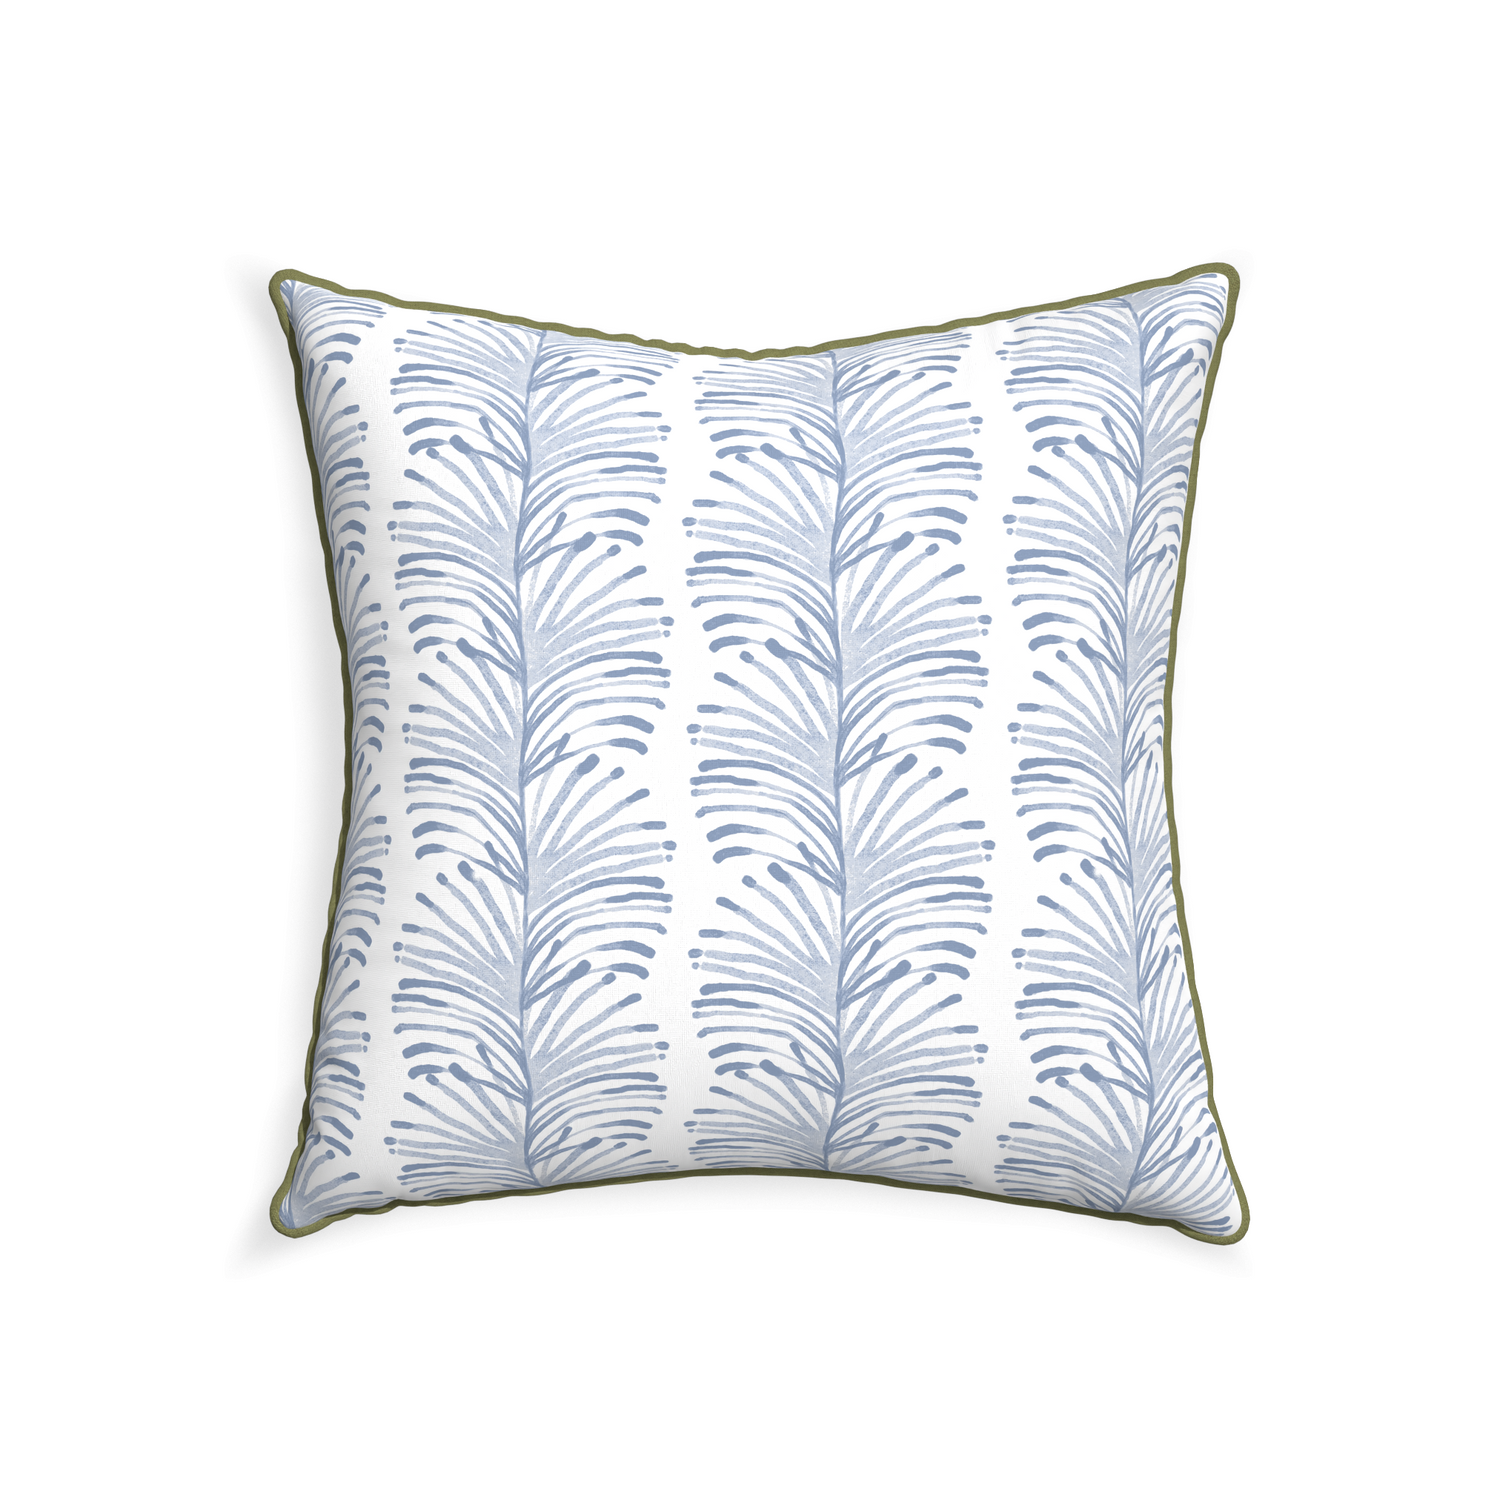 22-square emma sky custom pillow with moss piping on white background